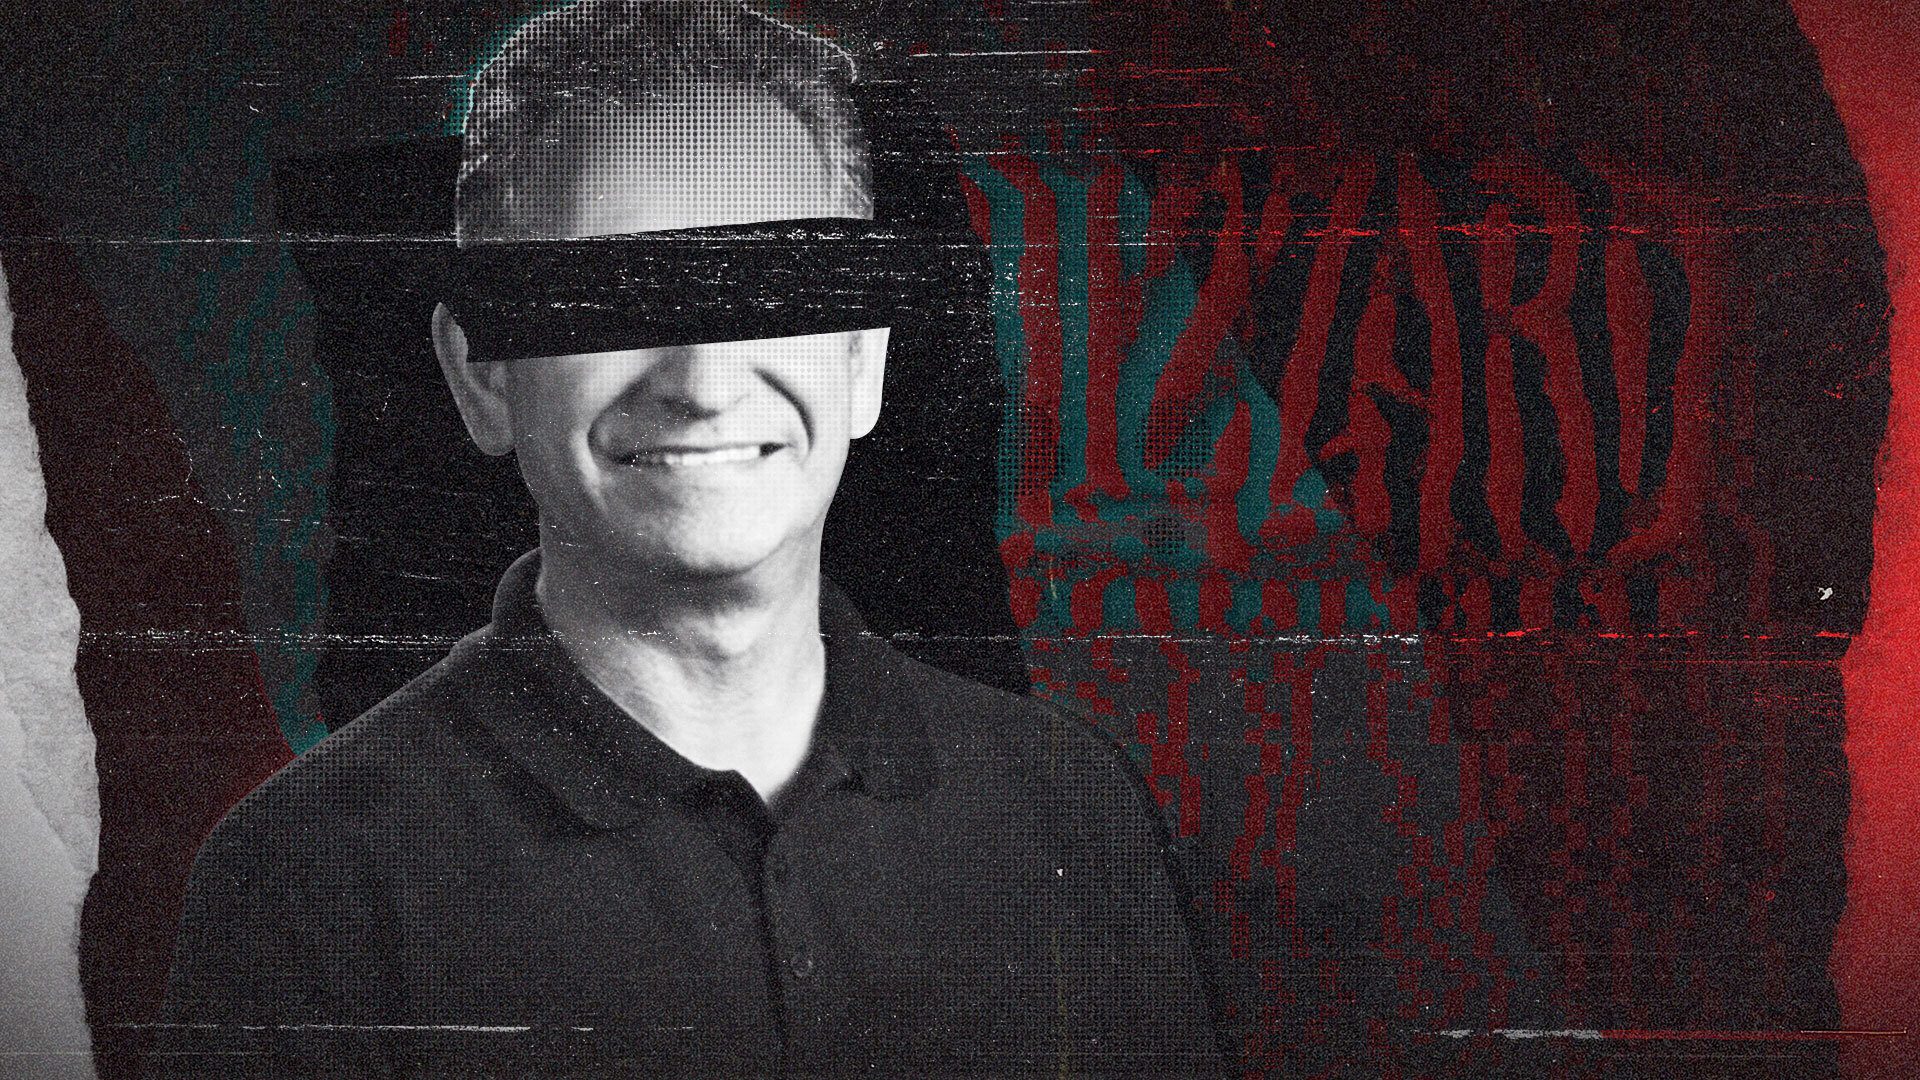 Mike Morhaime Activision Blizzard